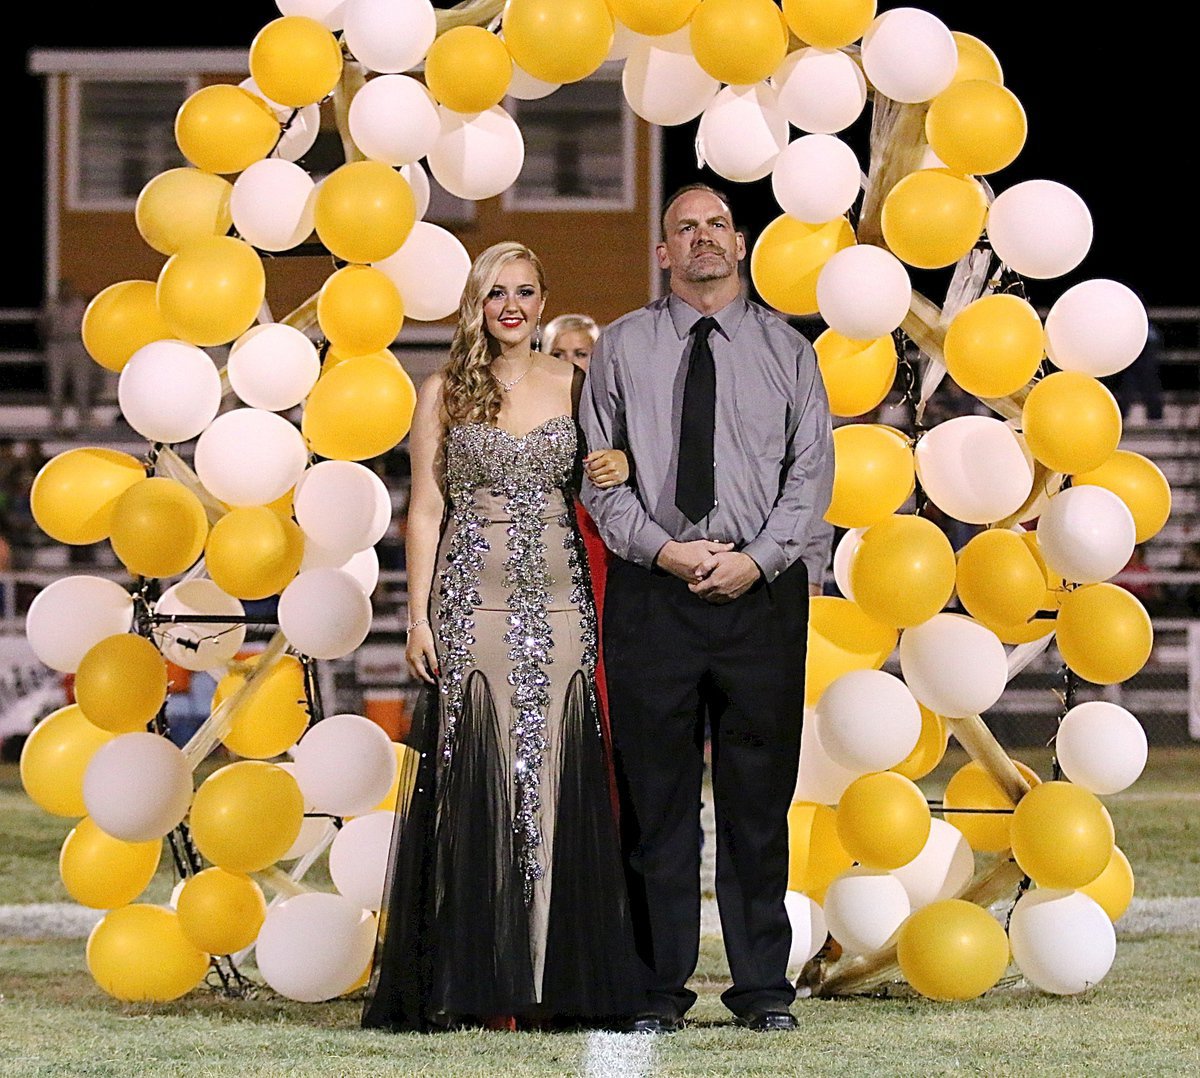 Image: Homecoming Queen Nominee Kelsey Nelson, a senior, is escorted by her father, Doug Nelson.